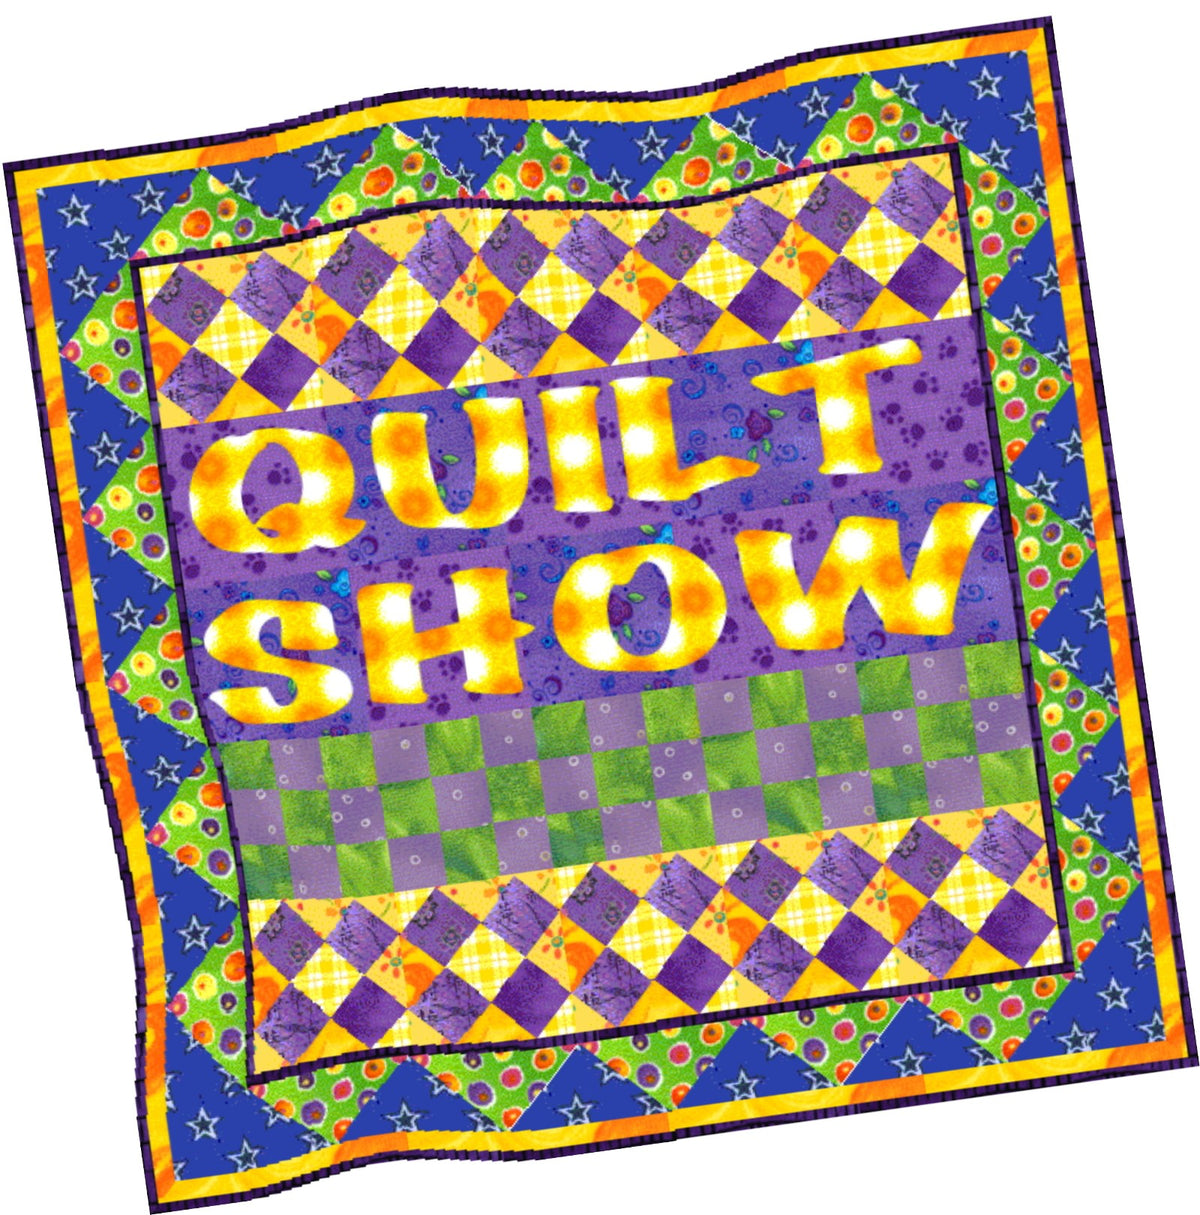 Find us at the Tidewater Quilt Show, Virginia Beach, VA